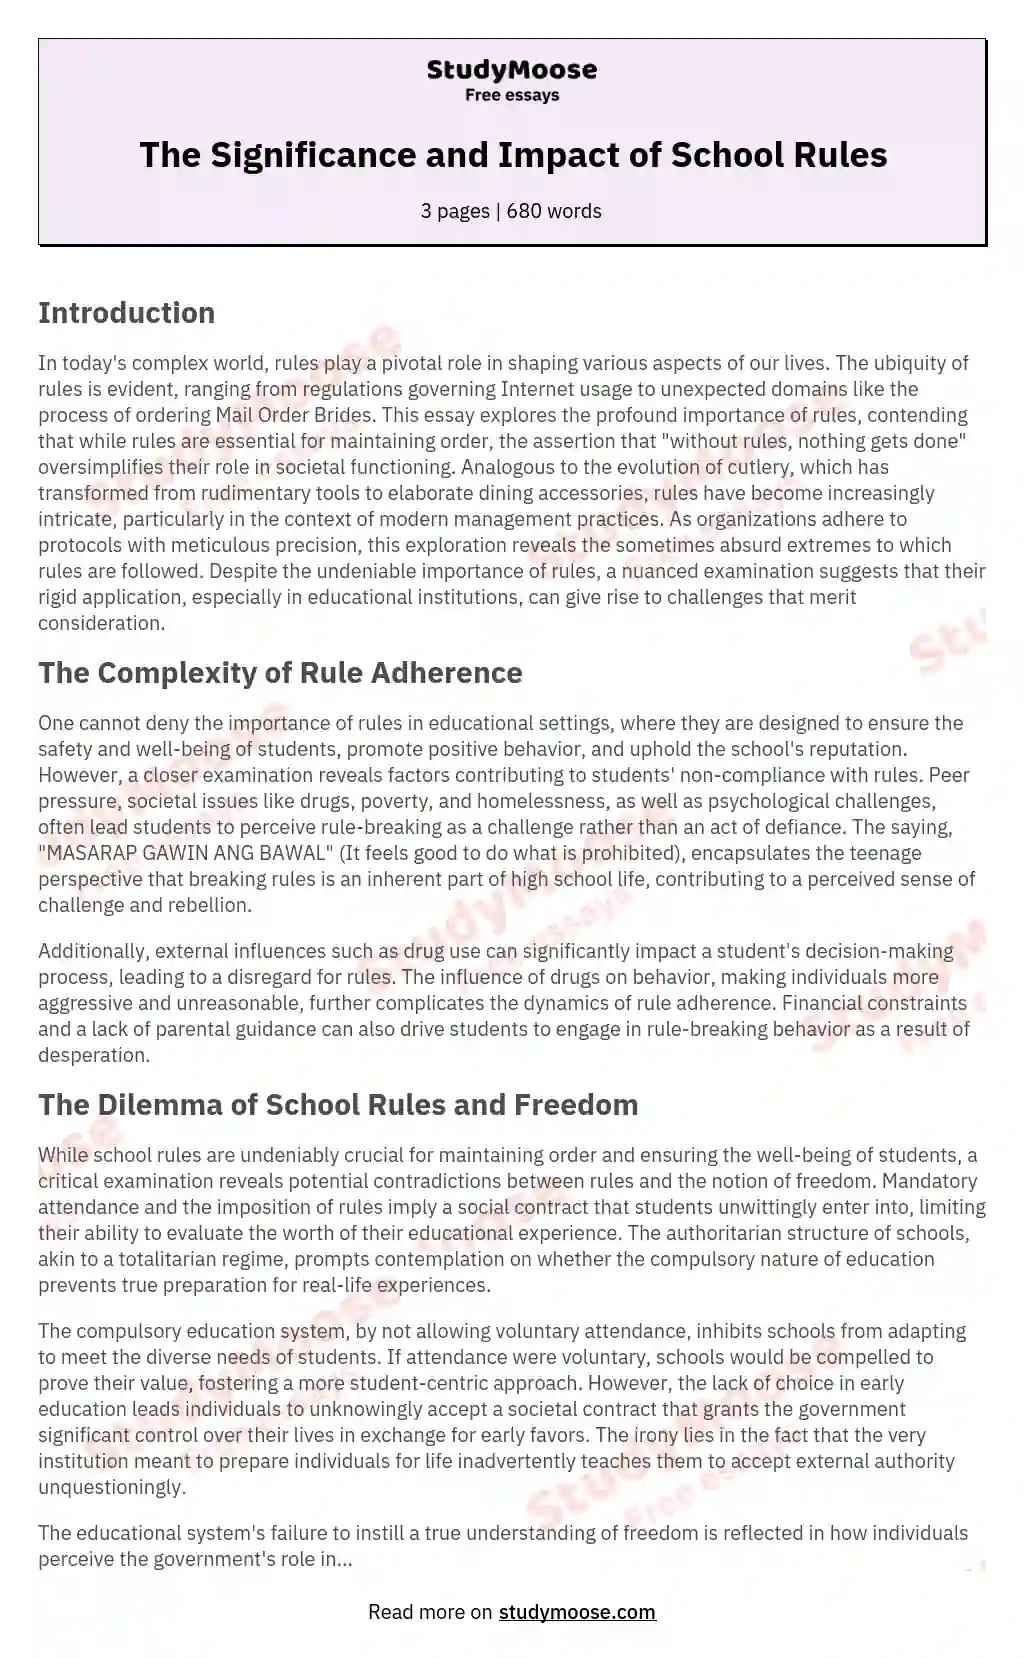 The Significance and Impact of School Rules essay